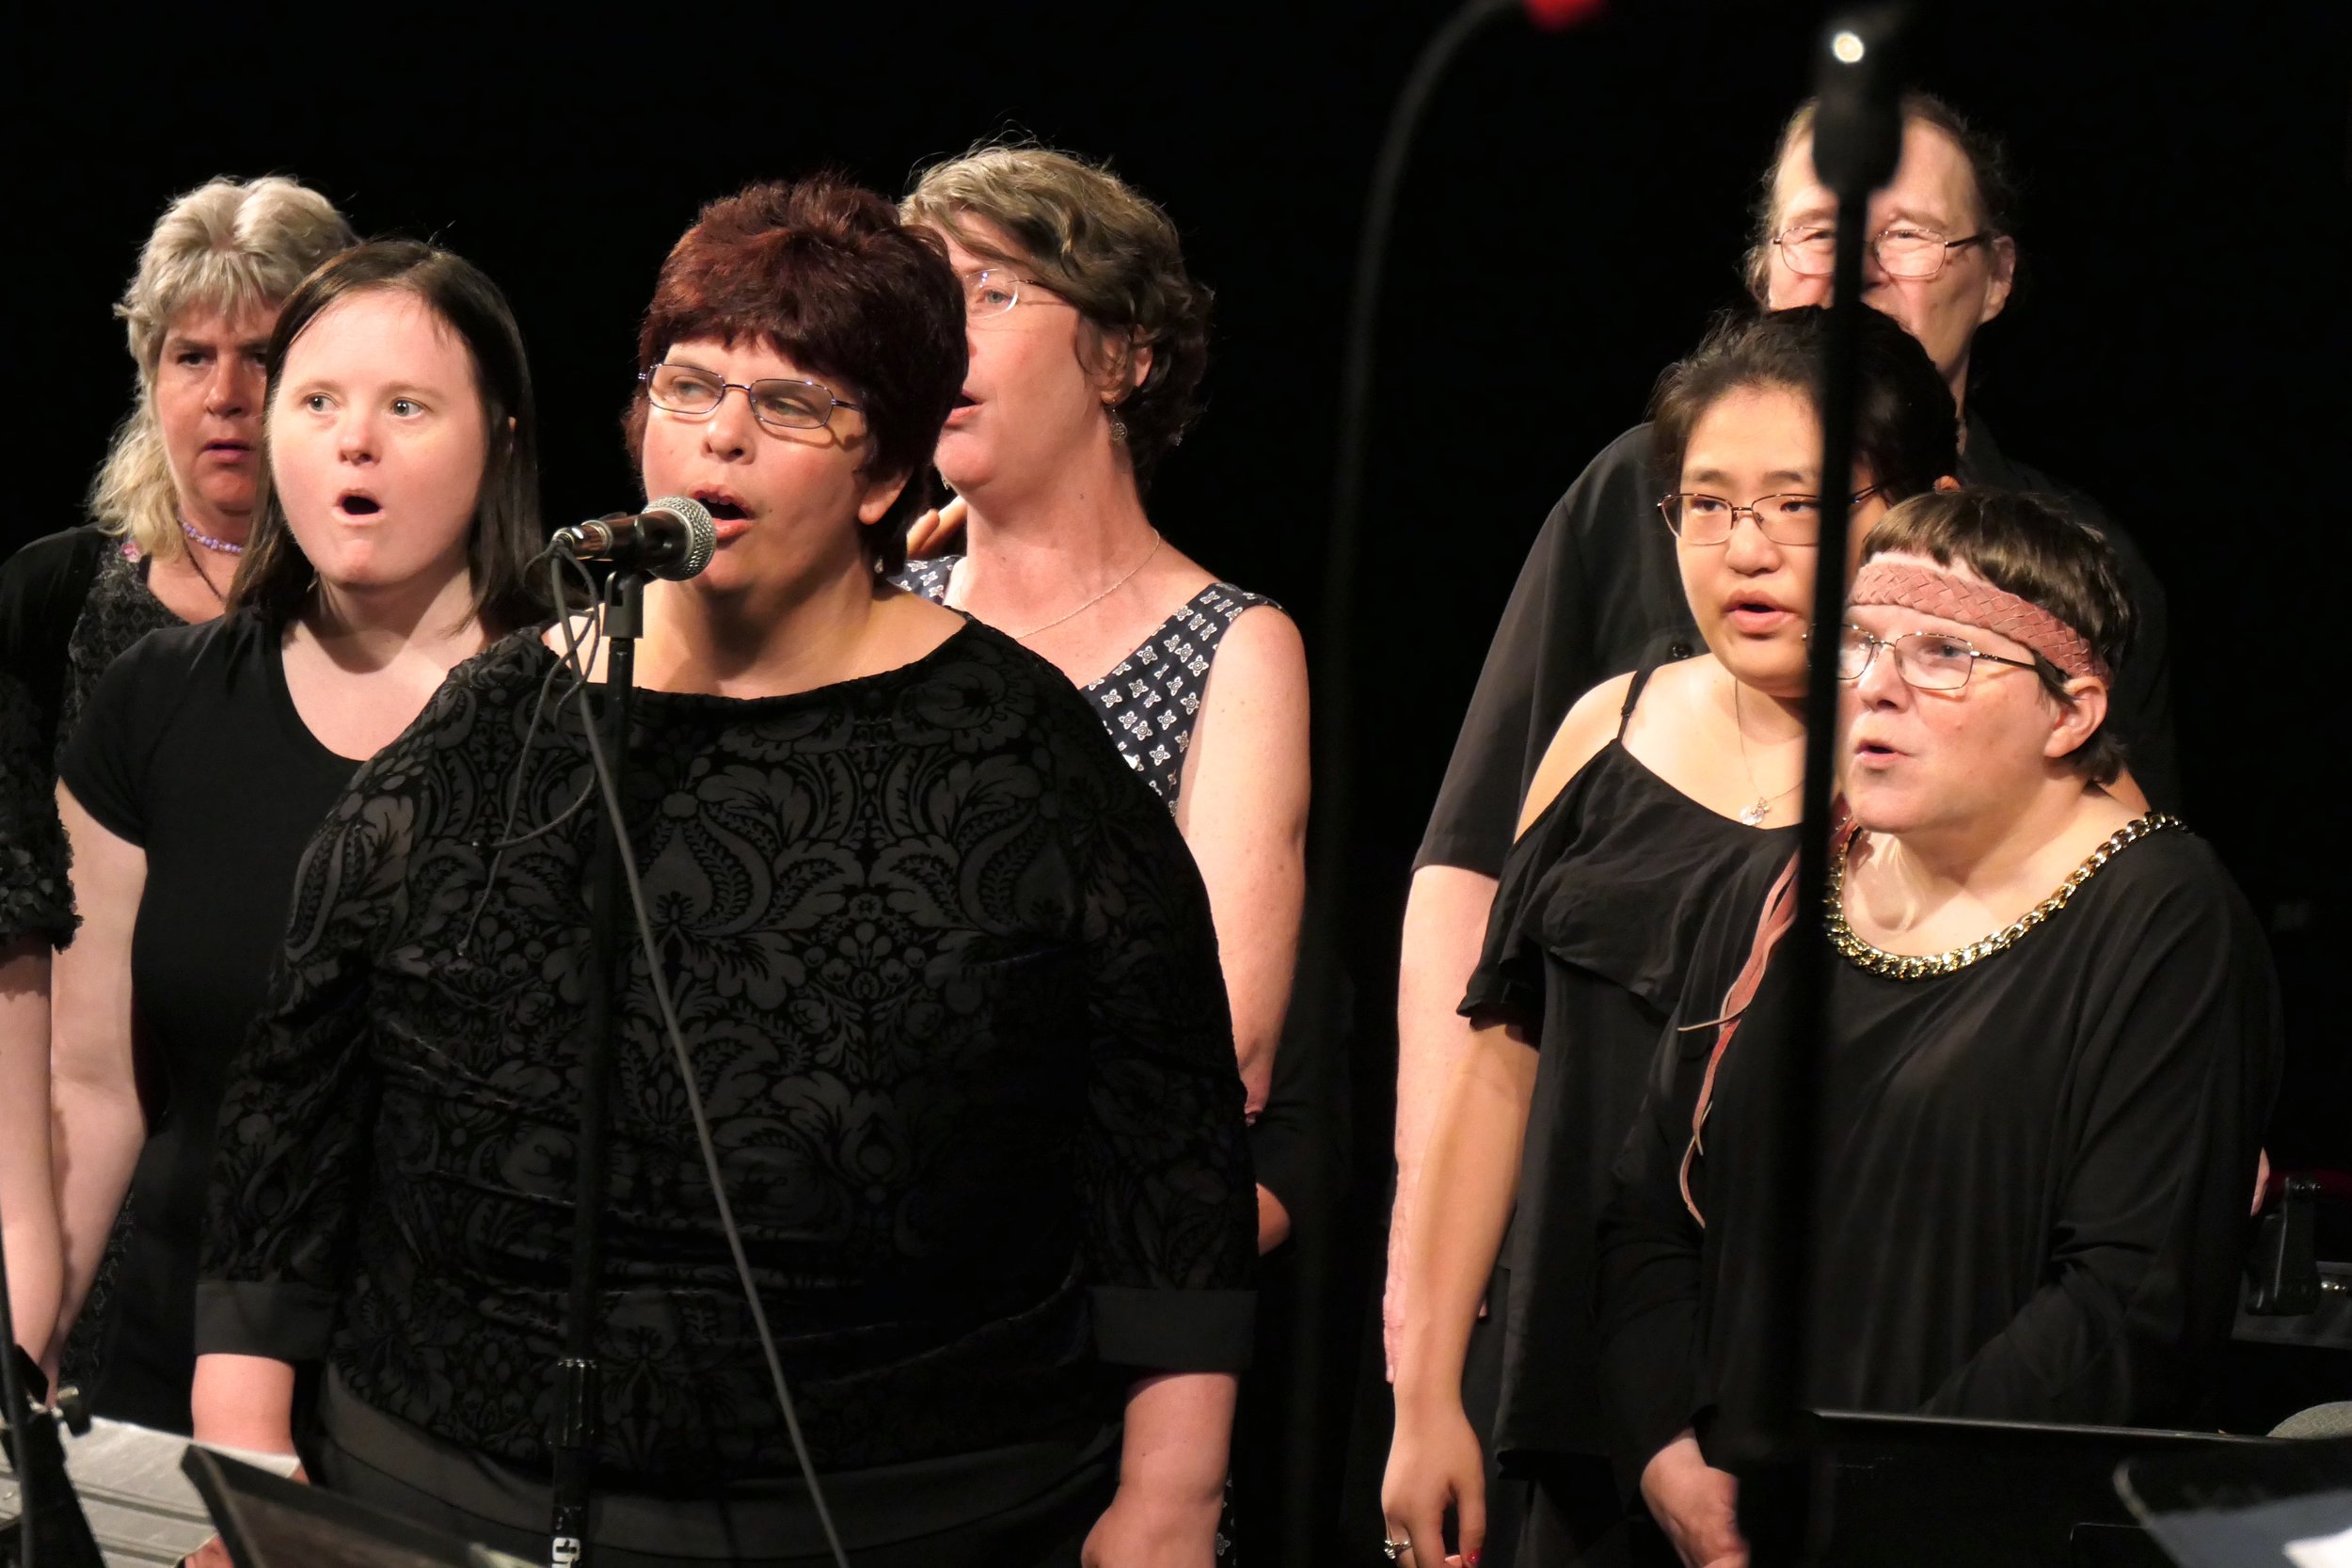 Group of women singing , some with microphones, in a dark room